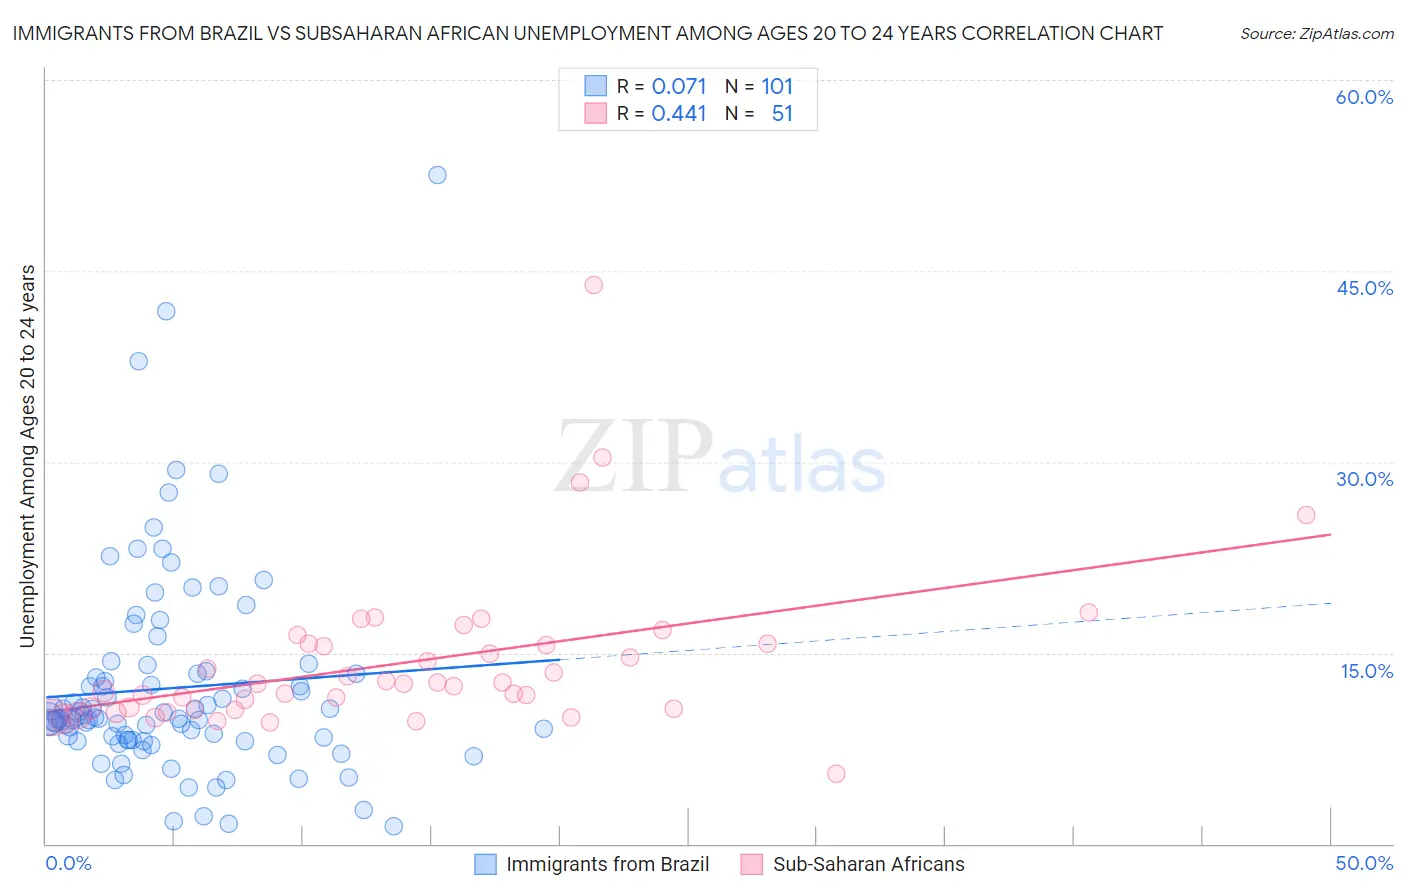 Immigrants from Brazil vs Subsaharan African Unemployment Among Ages 20 to 24 years